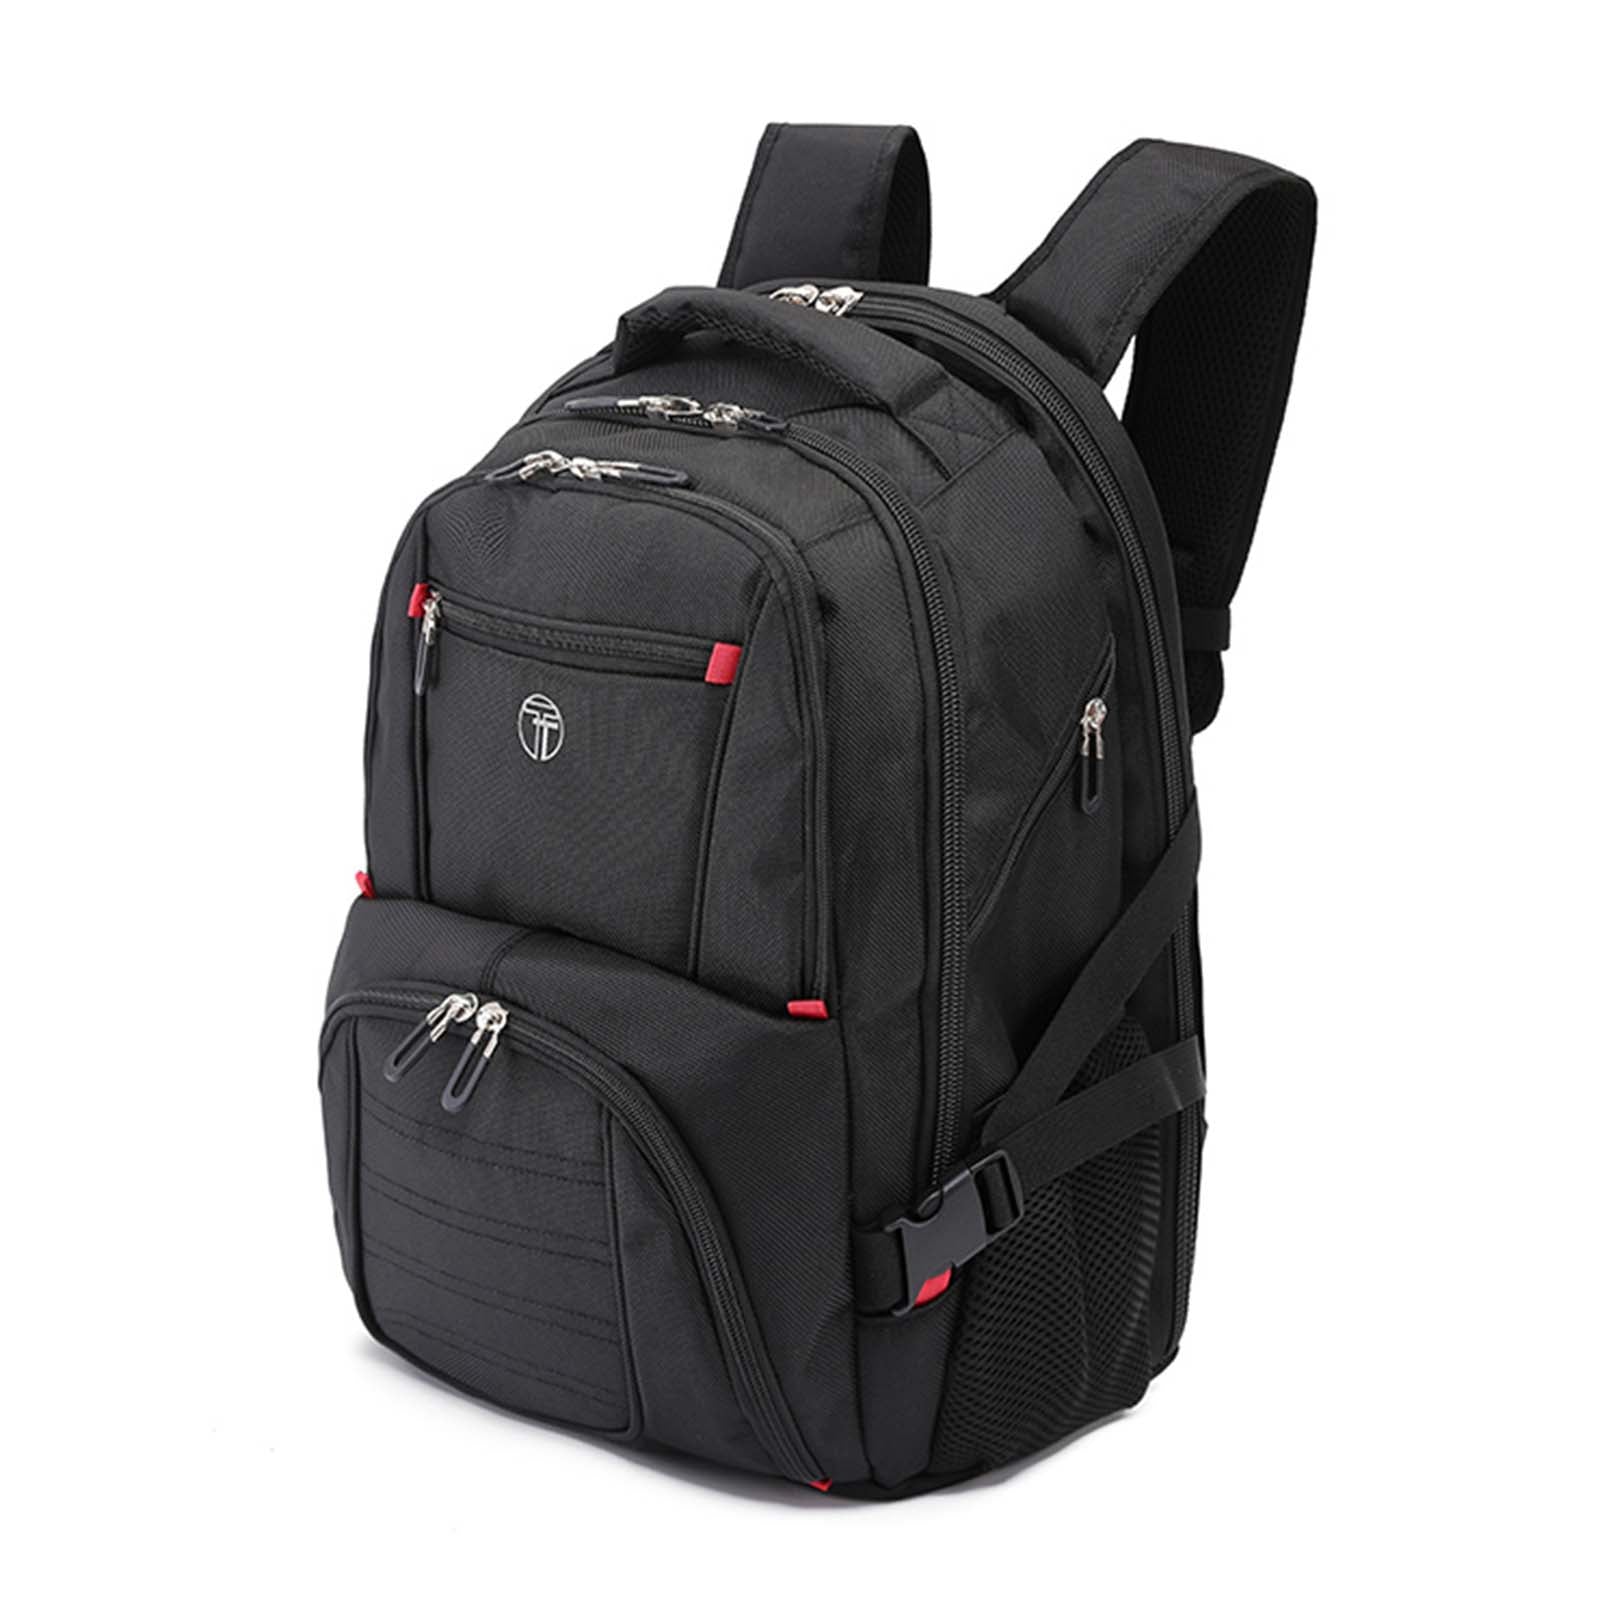 tosca-ultimate-15-inch-laptop-backpack-black-front-angle